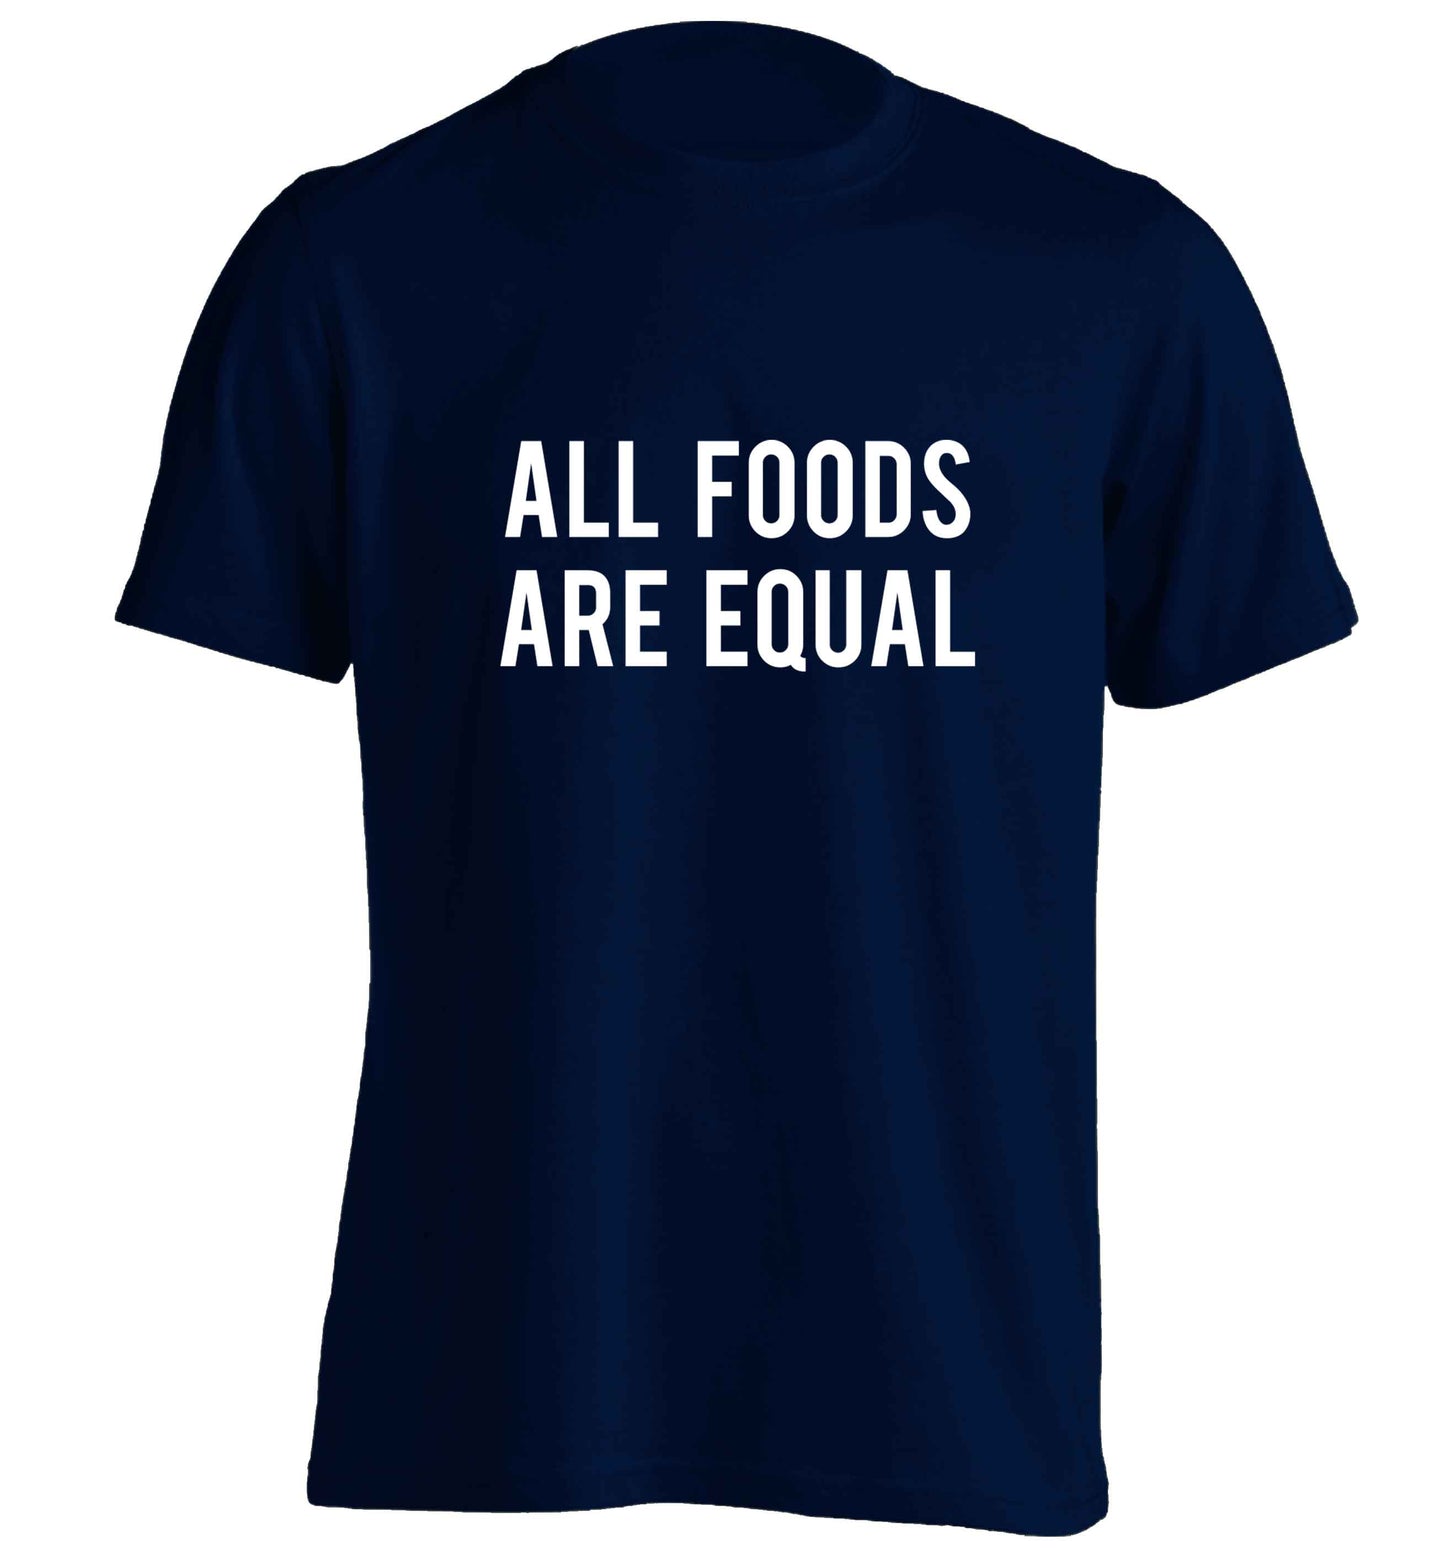 All foods are equal adults unisex navy Tshirt 2XL